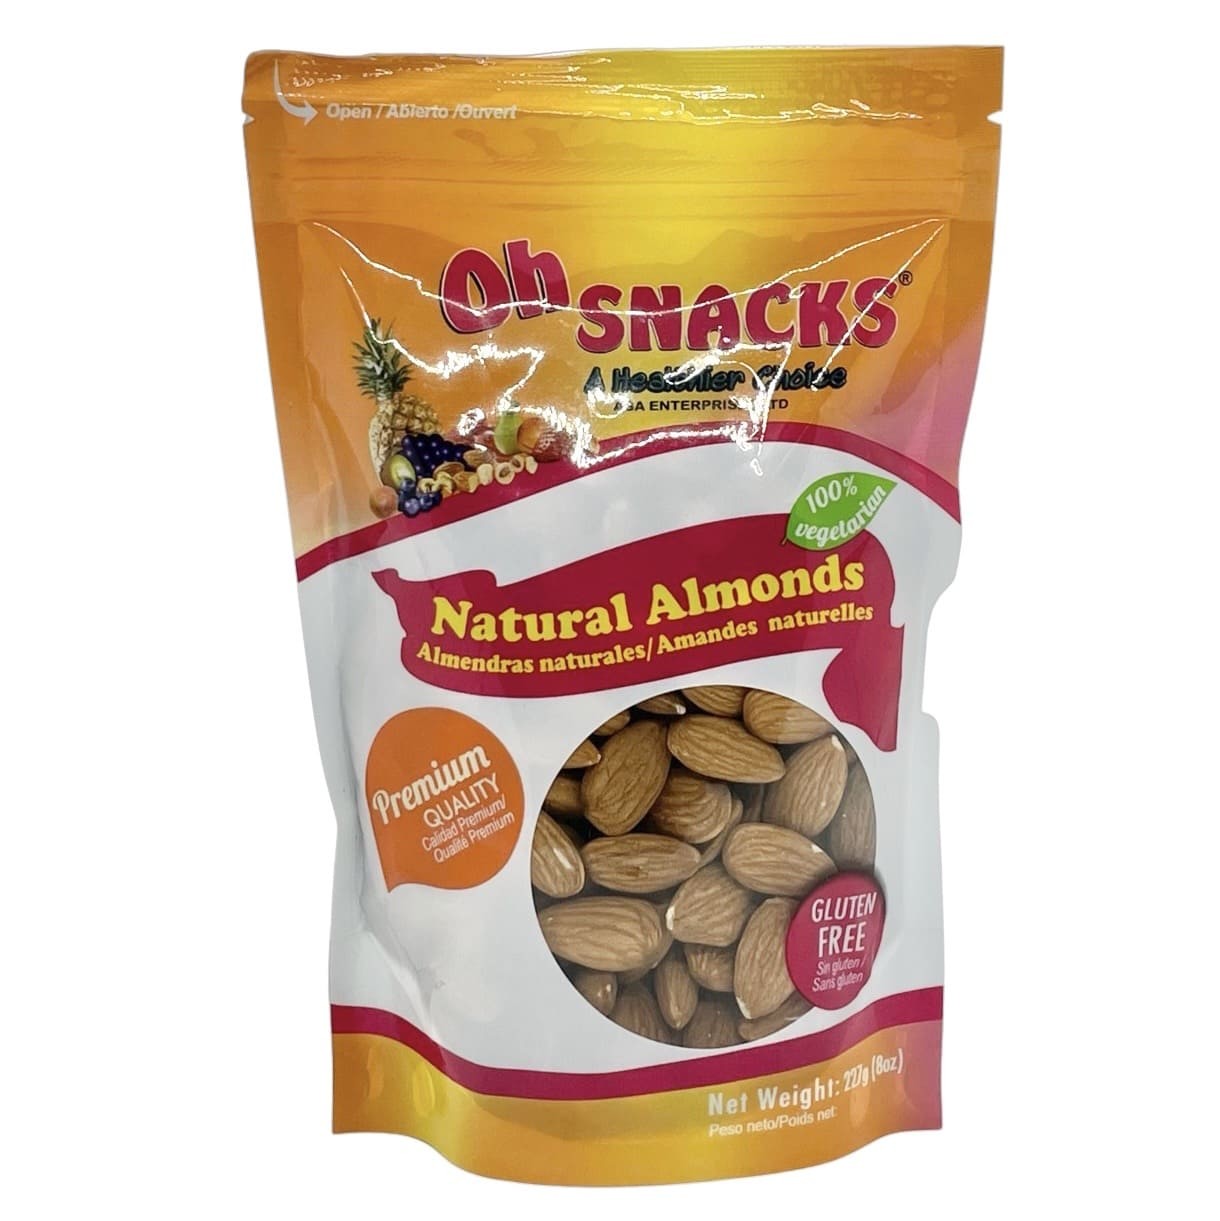 OH SNACKS ALMONDS NATURAL 200g